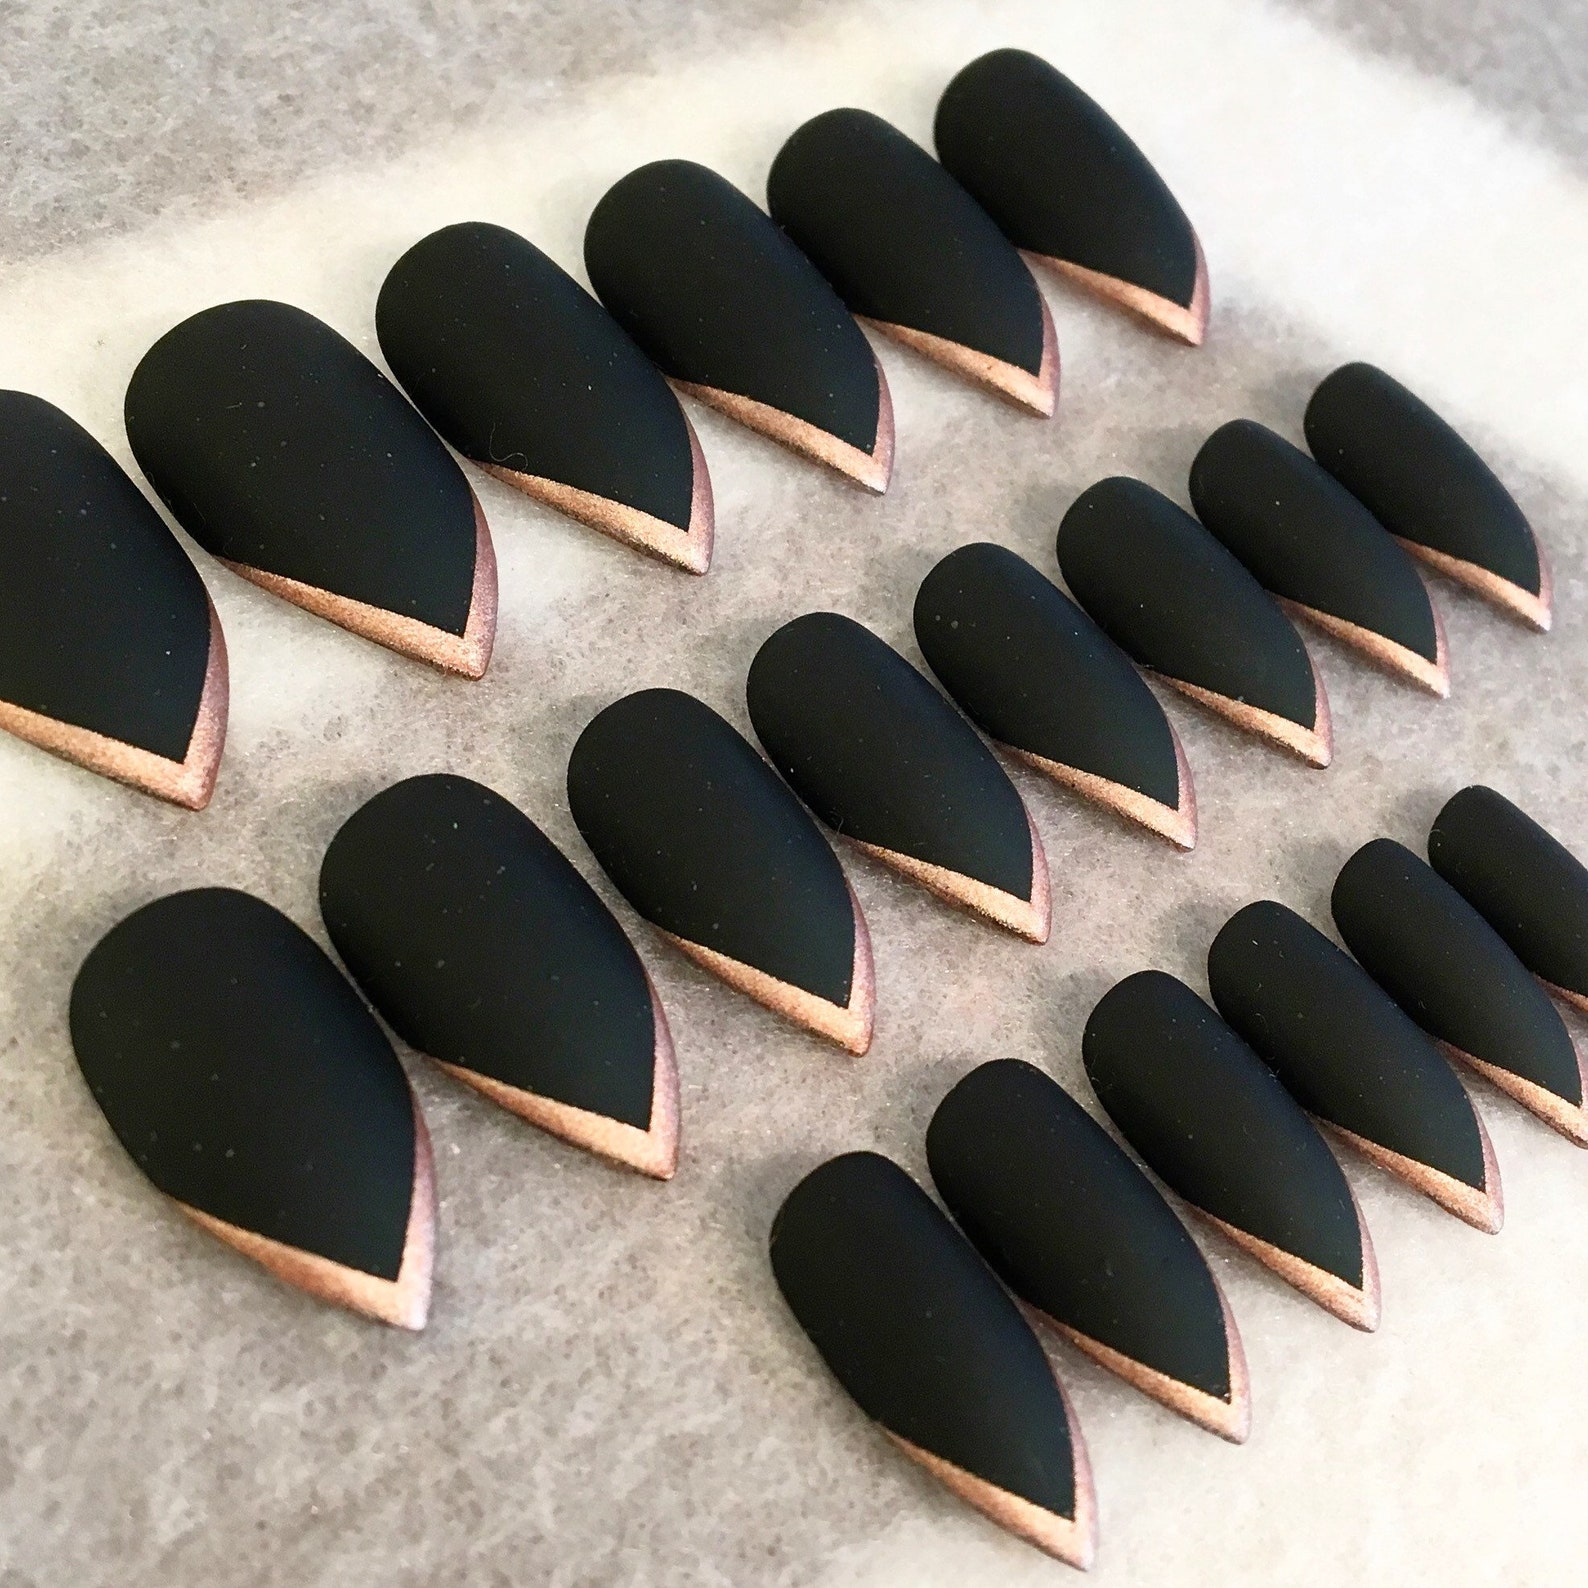 Black And Rose Gold Stiletto Faux Nails Fake Nails Rose | Etsy